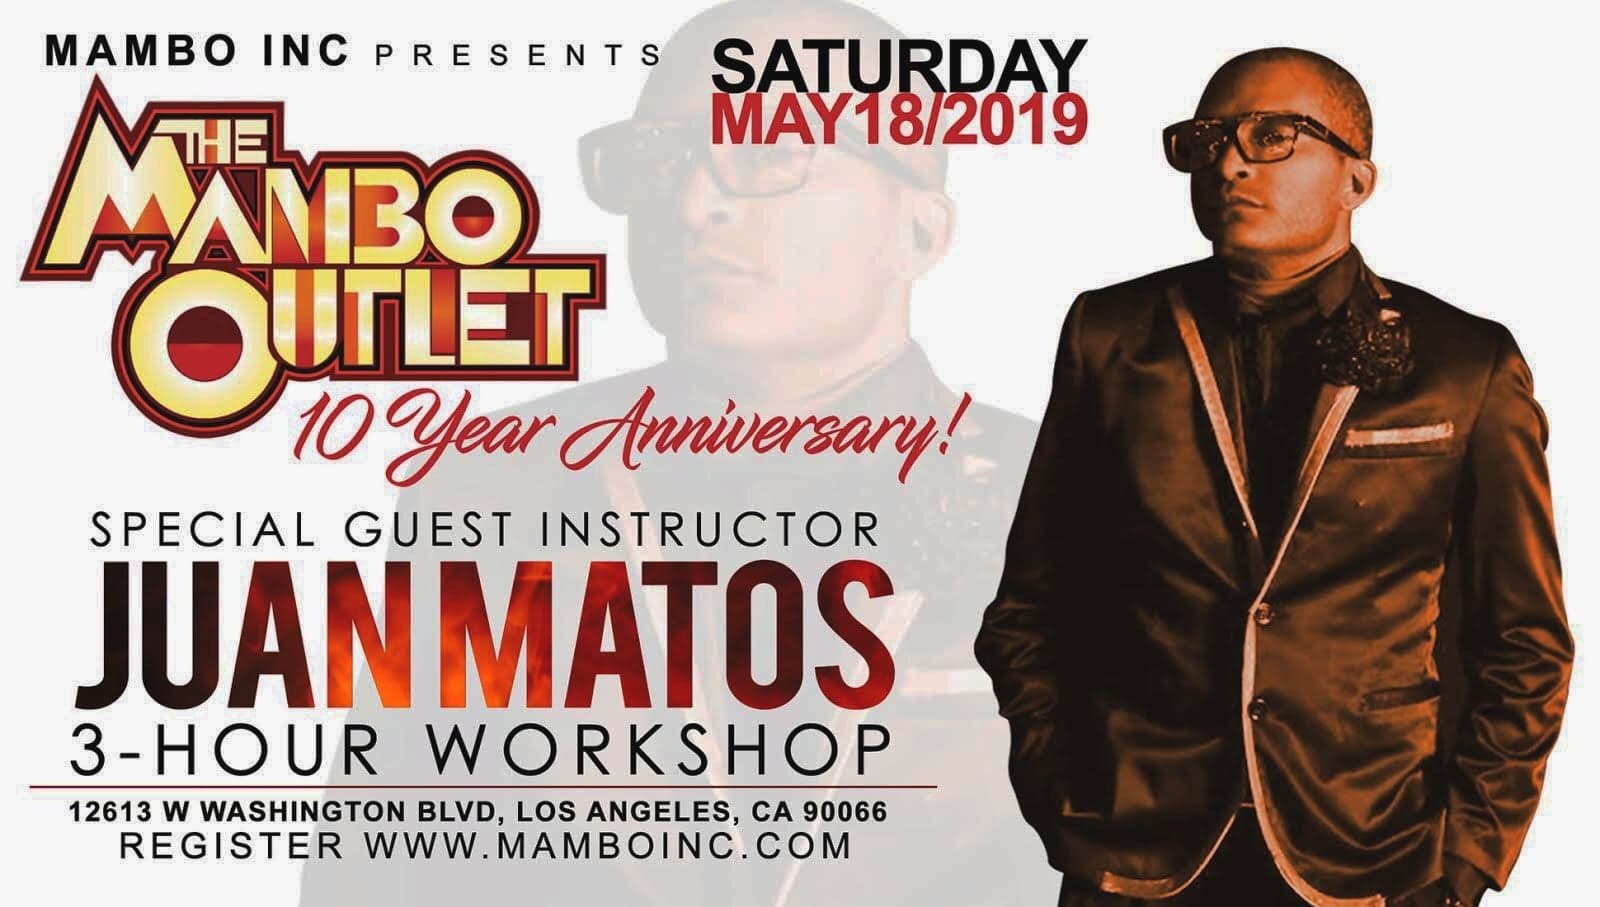 The Mambo Outlet 10 Year Anniversary – Juan Matos – 3-Hour Workshop – Saturday, May 18th